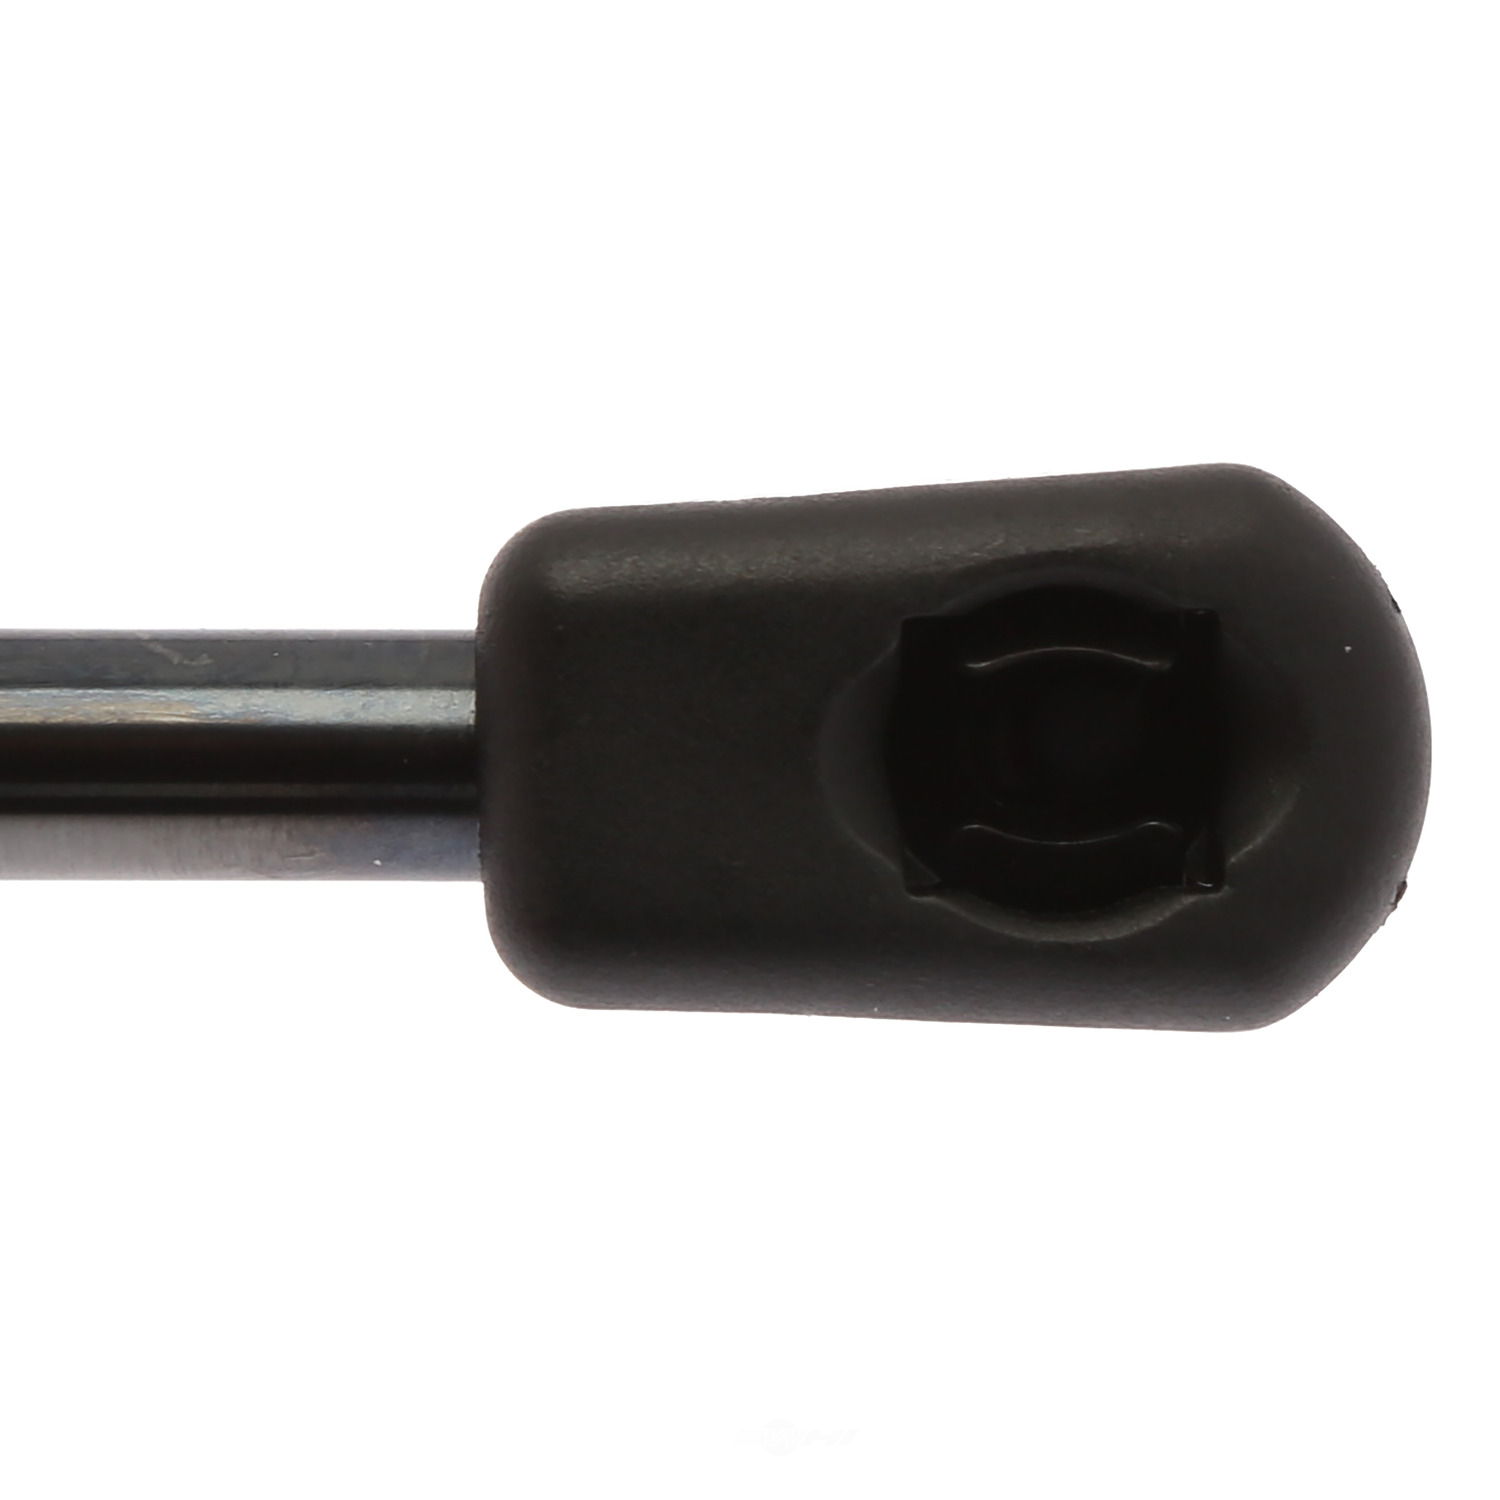 STRONG ARM - Trunk Lid Lift Support - STR 4075